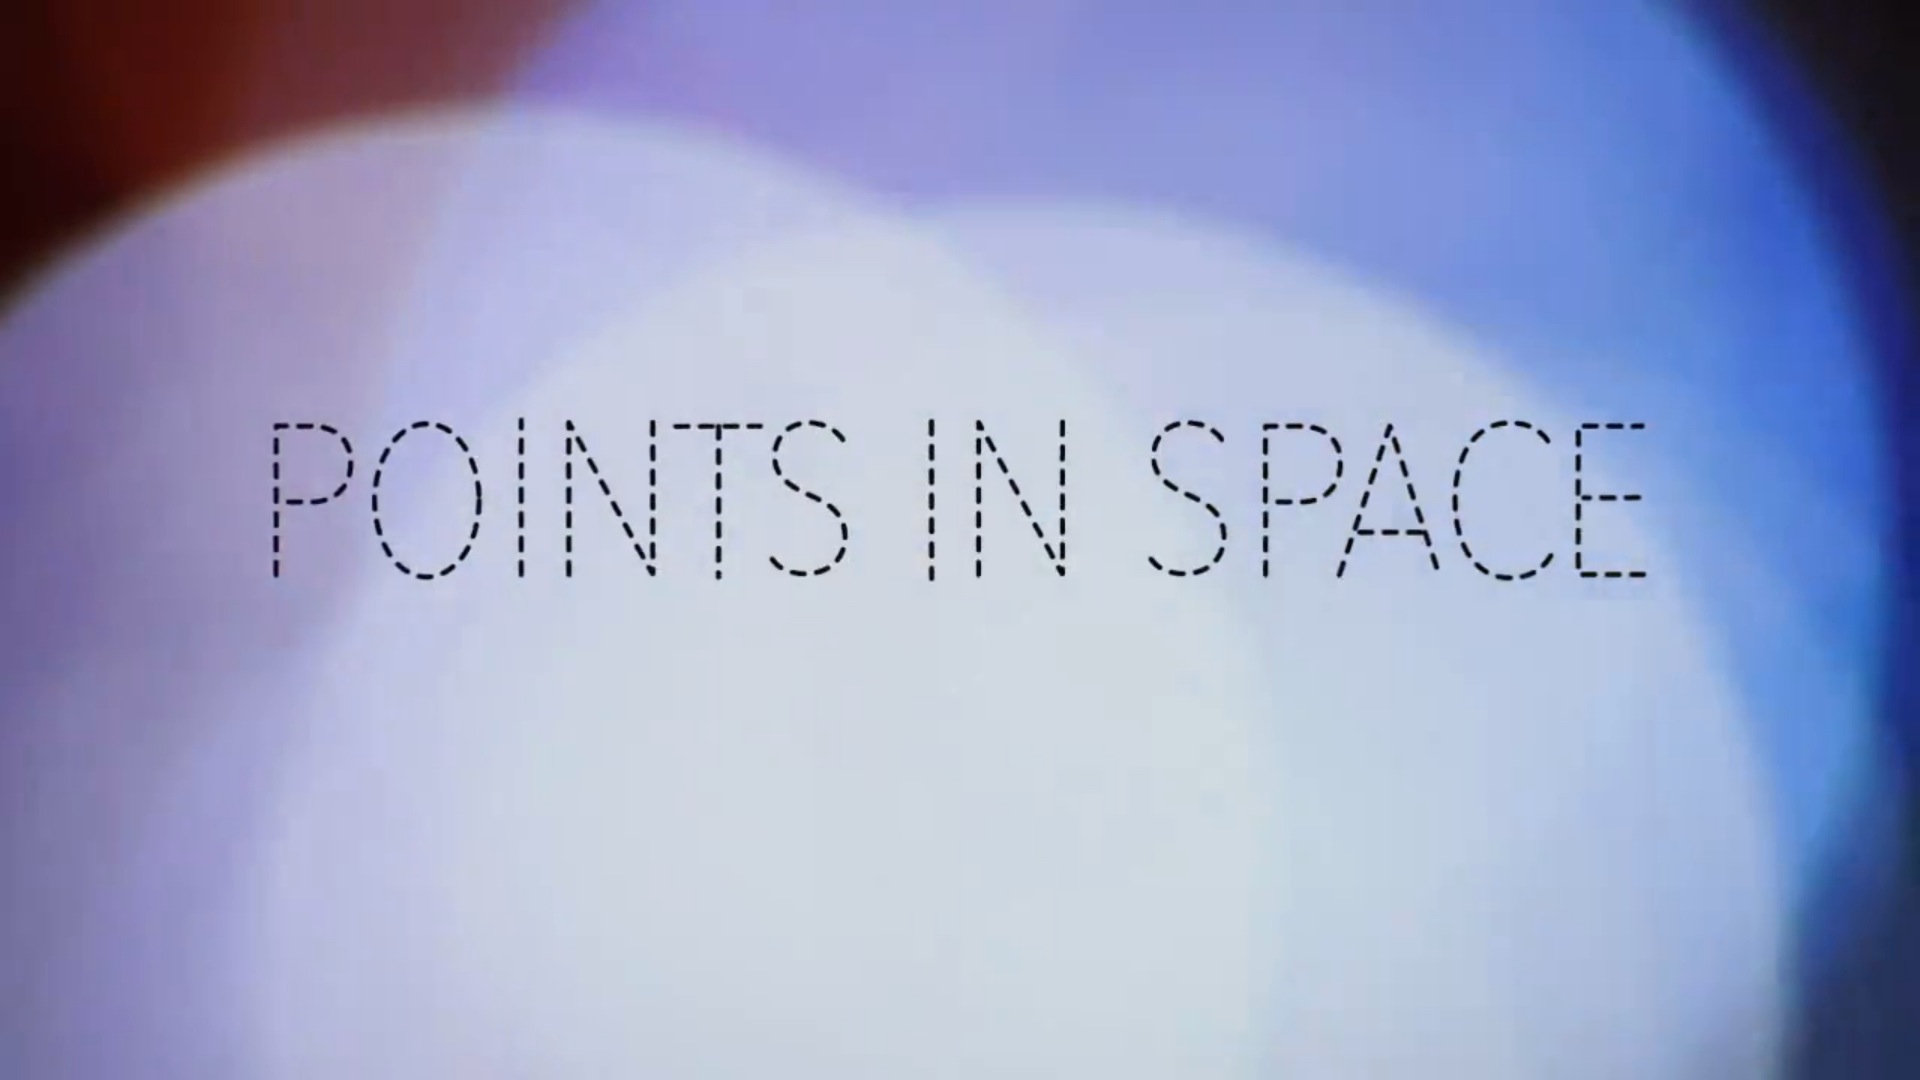 Points in Space